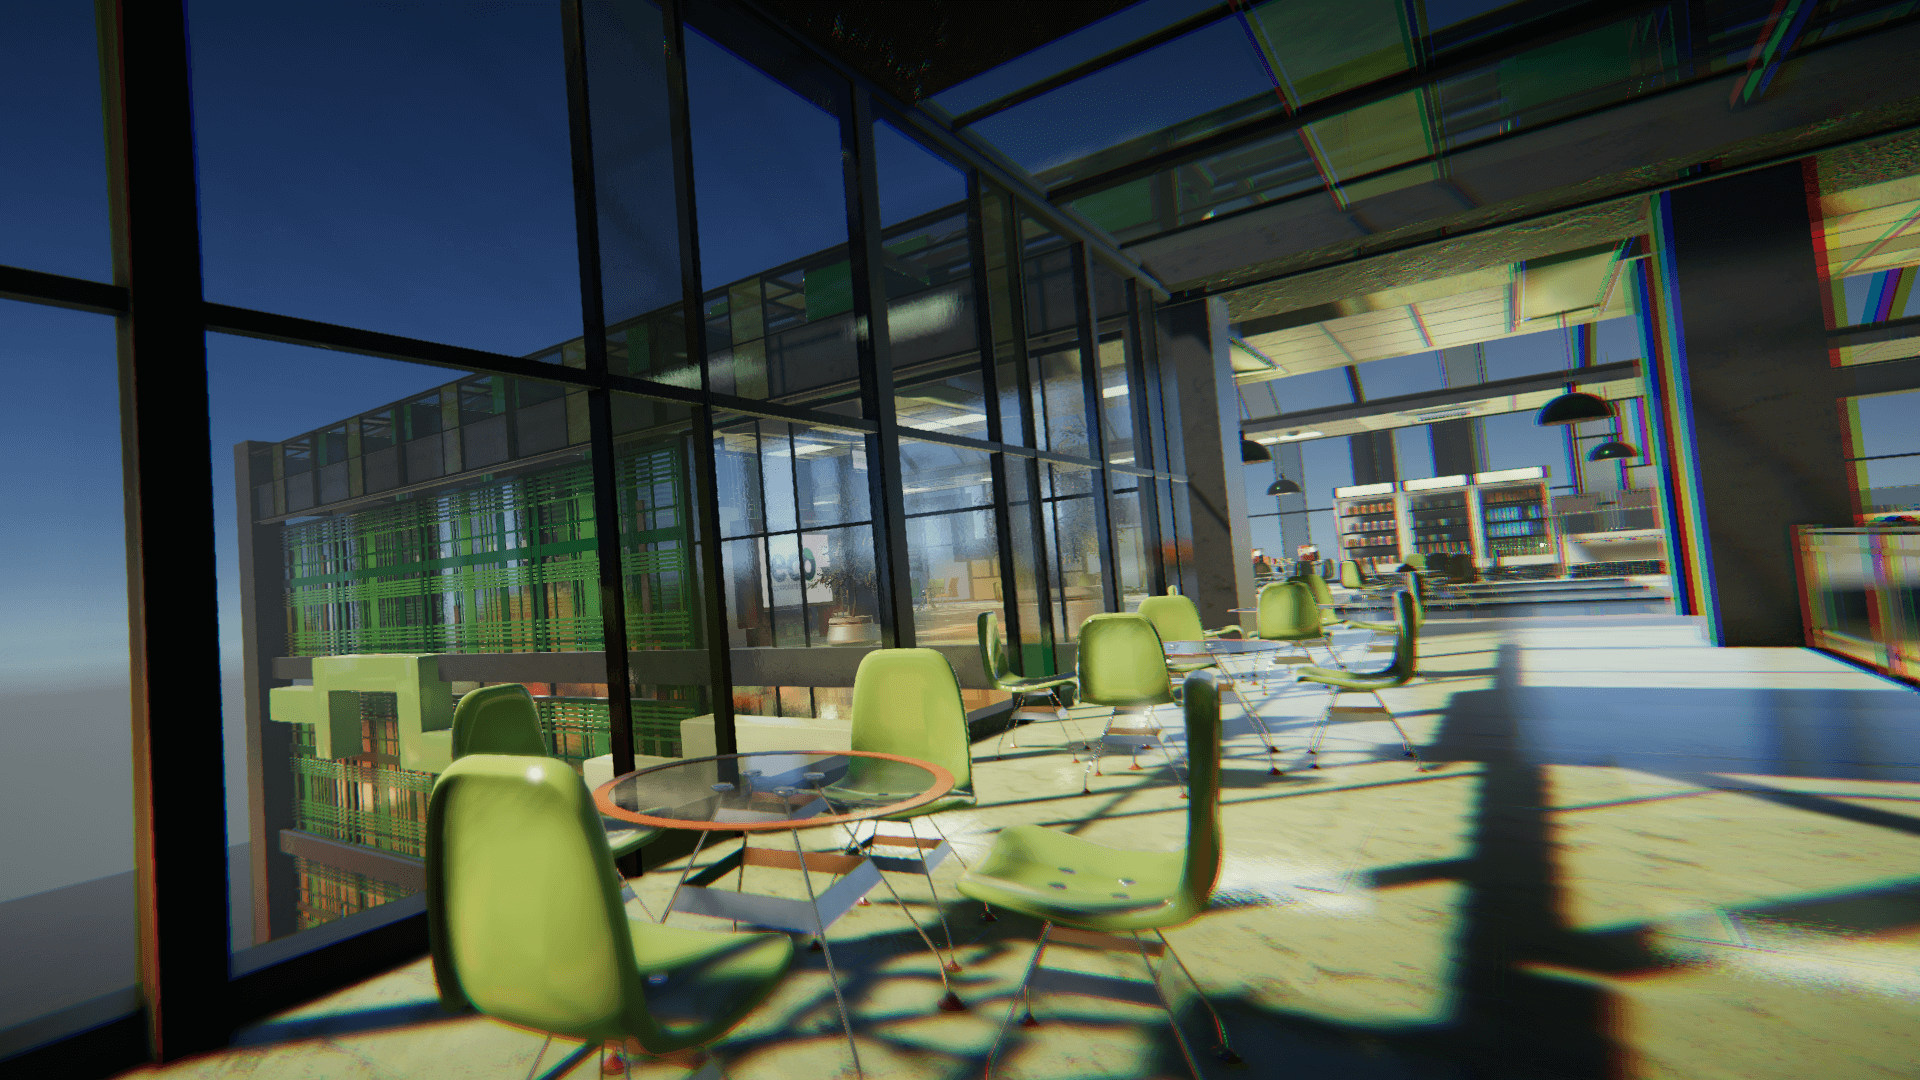 An image showing Eco Corporate Building asset pack, created with Unity Engine